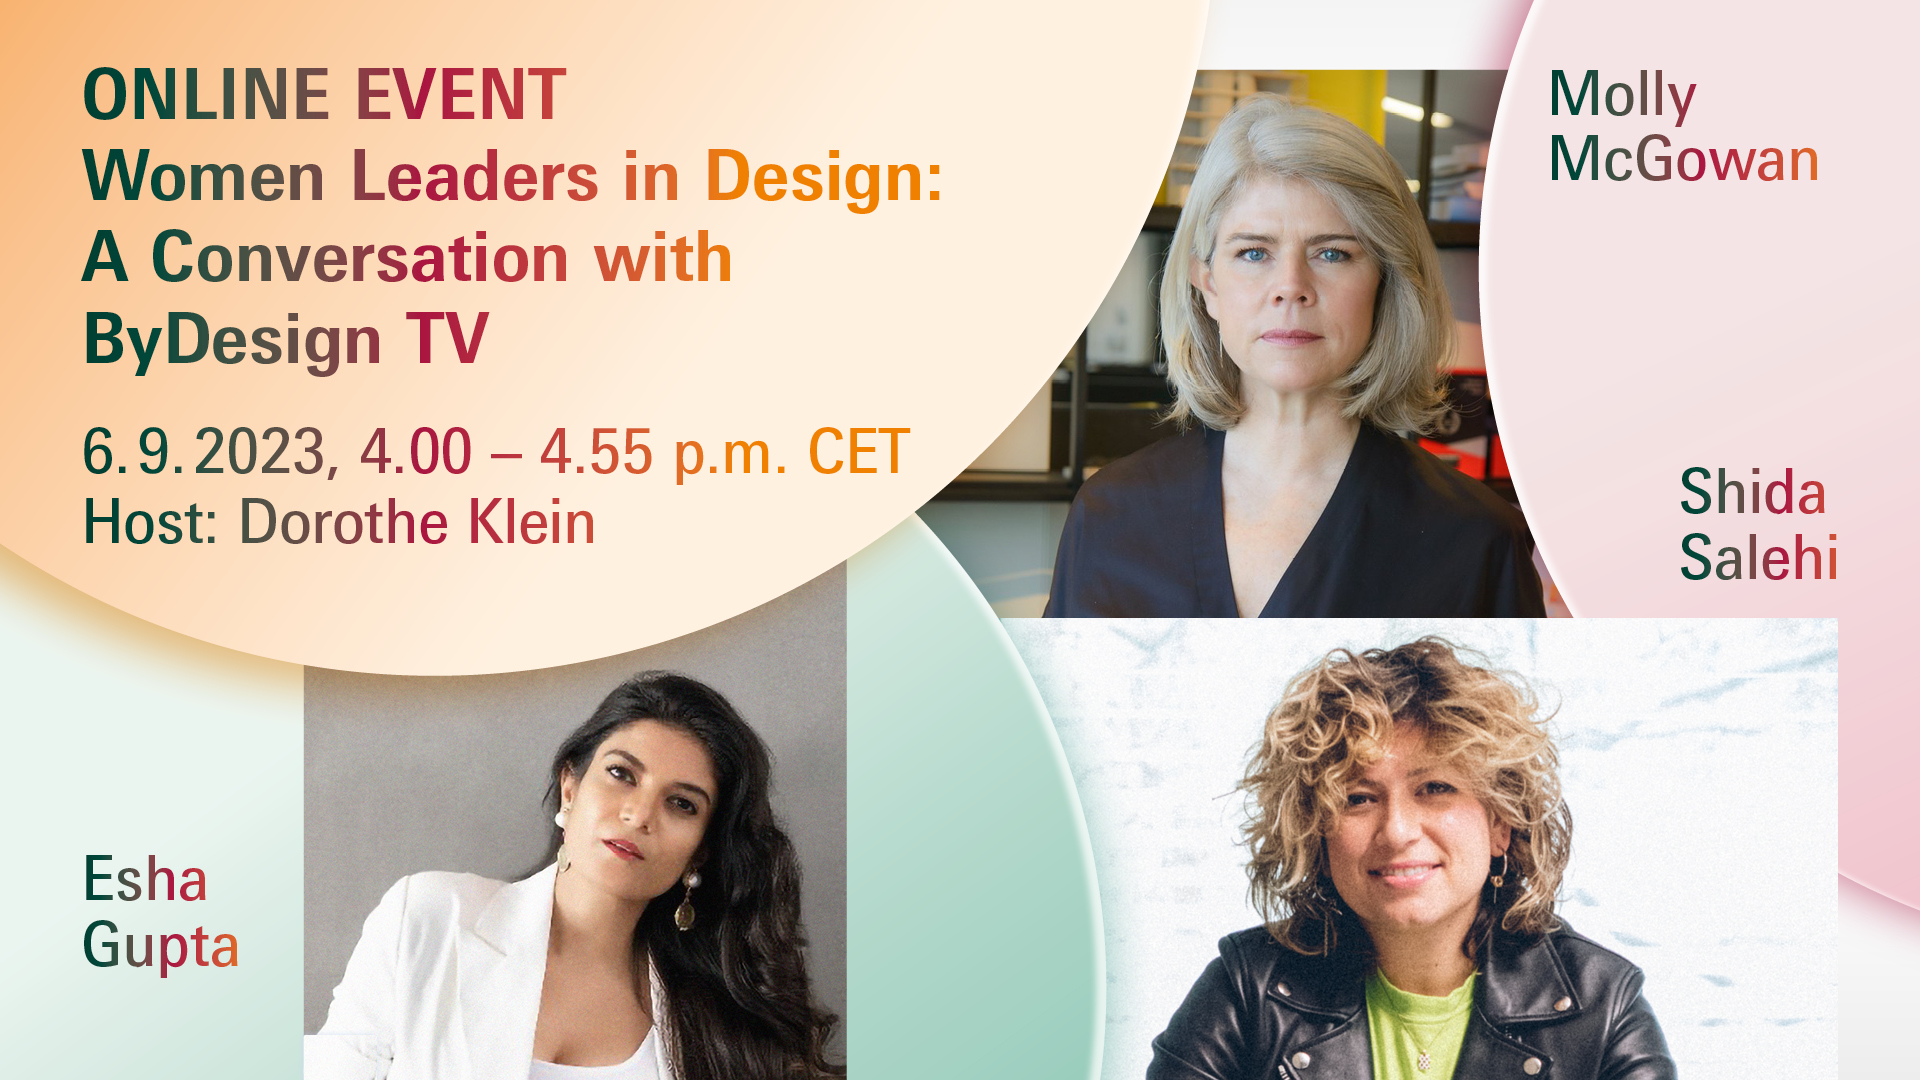 panel discussion "Women Leaders in Design: A Conversation with By Design TV" with Esha Gupta, founder and publisher of Design Pataki from India, Molly McGowan, partner of Ennead Architects from the USA, and Shida Salehi, founder and managing director of Customs Bureau from the UK